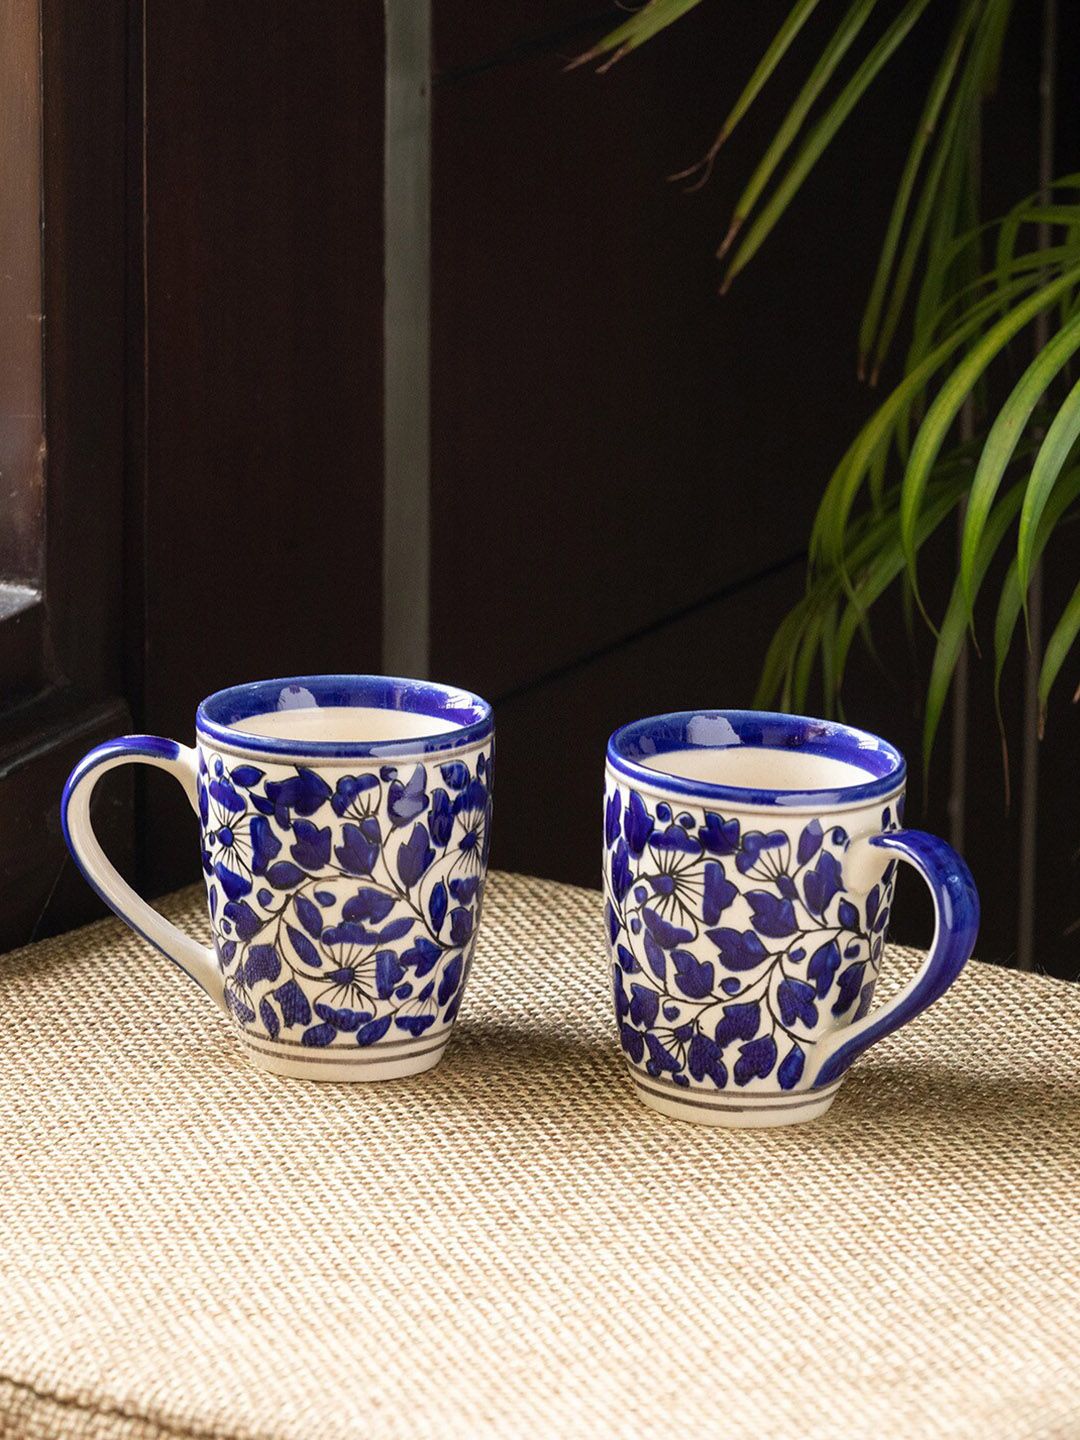 ExclusiveLane Navy Blue & White Floral Printed Ceramic Glossy Mugs Set of Cups and Mugs Price in India